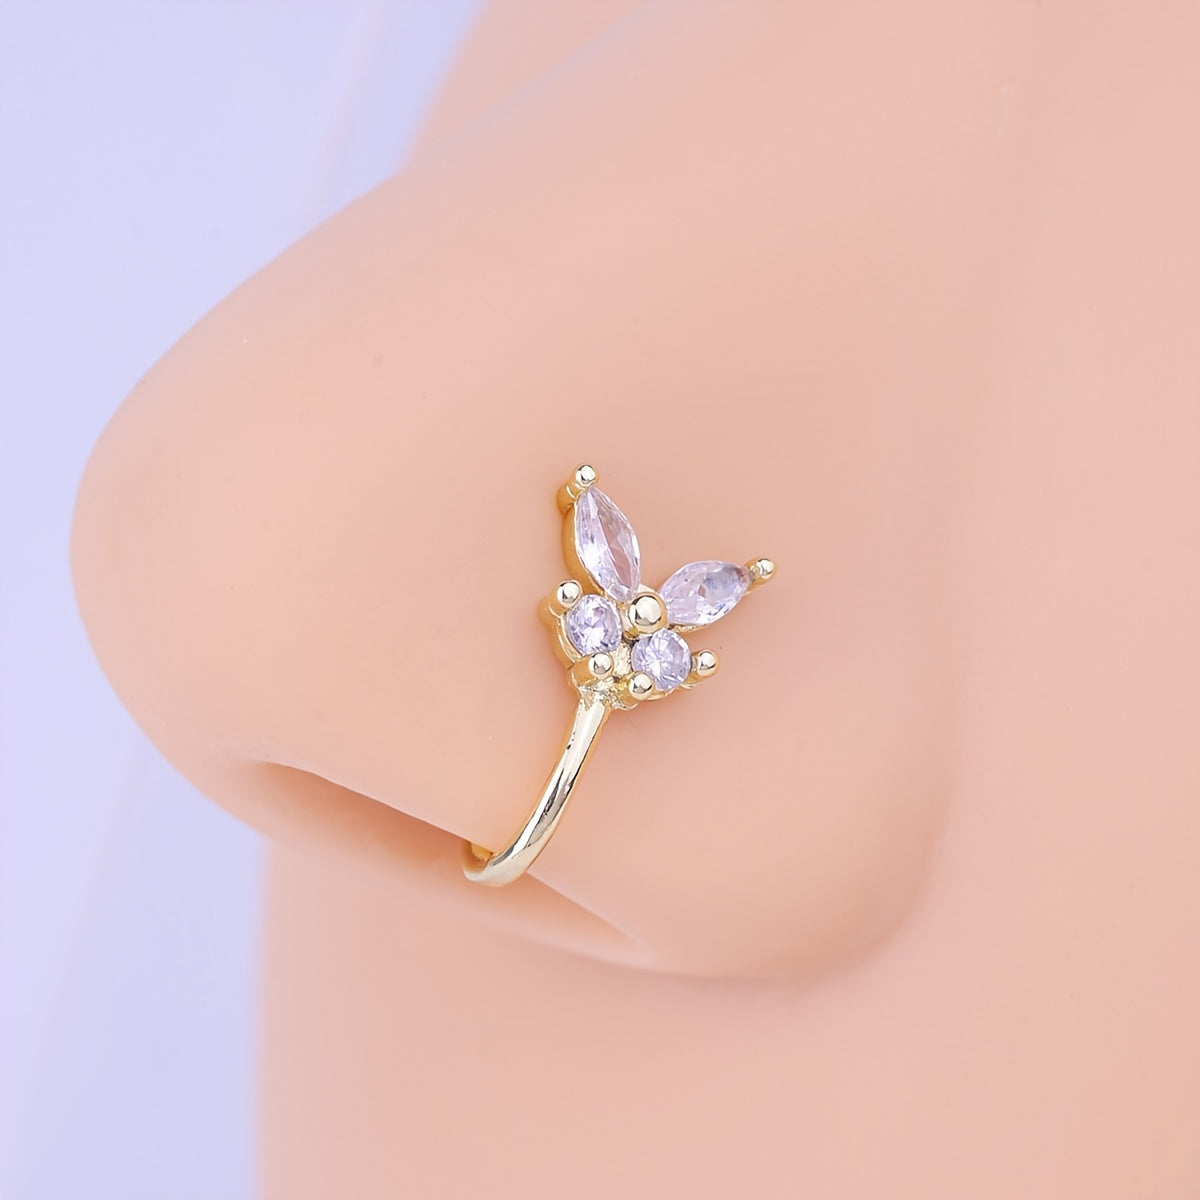 Add a Touch of Glamor to Your Wedding Look with this Delicate Zircon Butterfly Nose Ring - Perfect Gift for Your Daughter